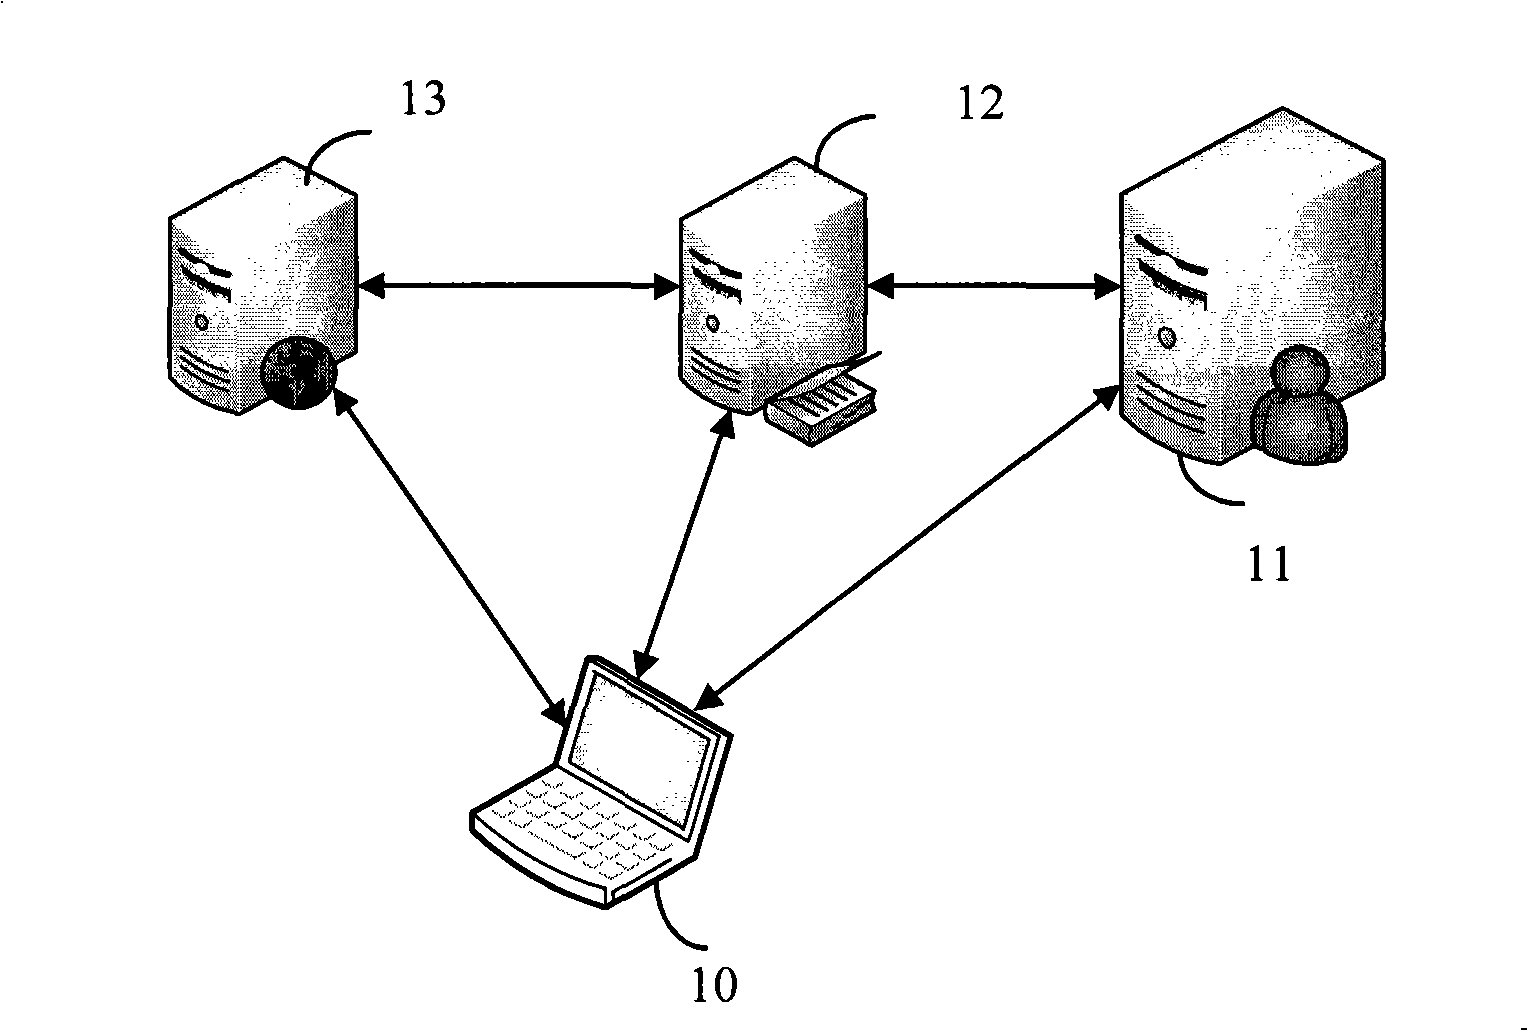 Method and system for logging on third party server through instant communication software